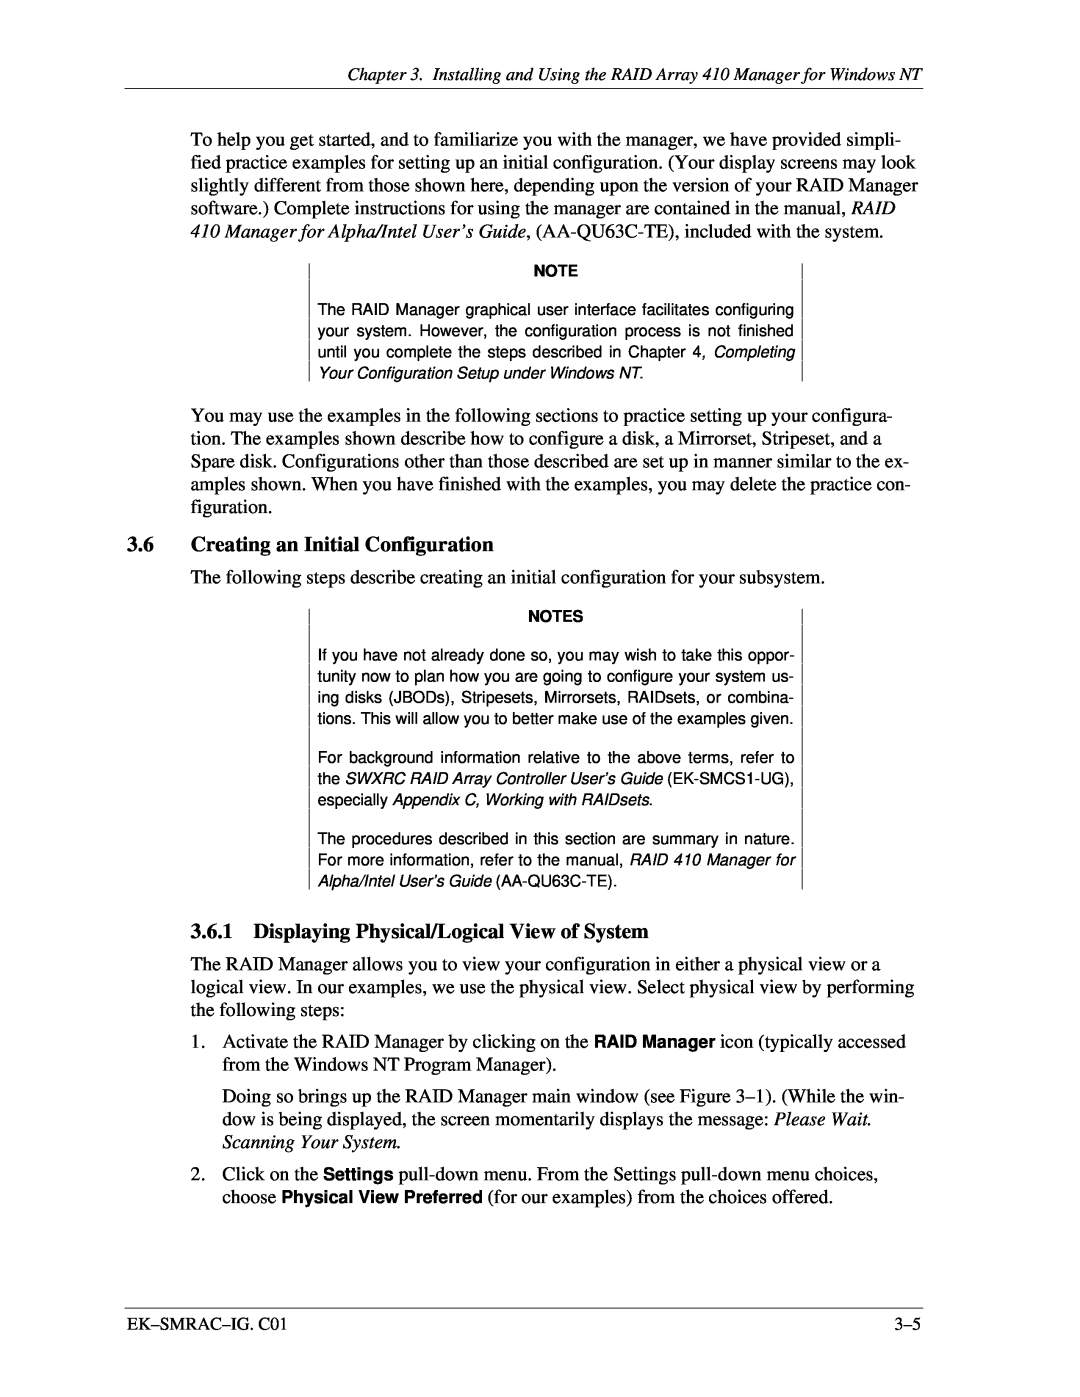 Intel 410 manual 3.6Creating an Initial Configuration, Displaying Physical/Logical View of System, Notes 